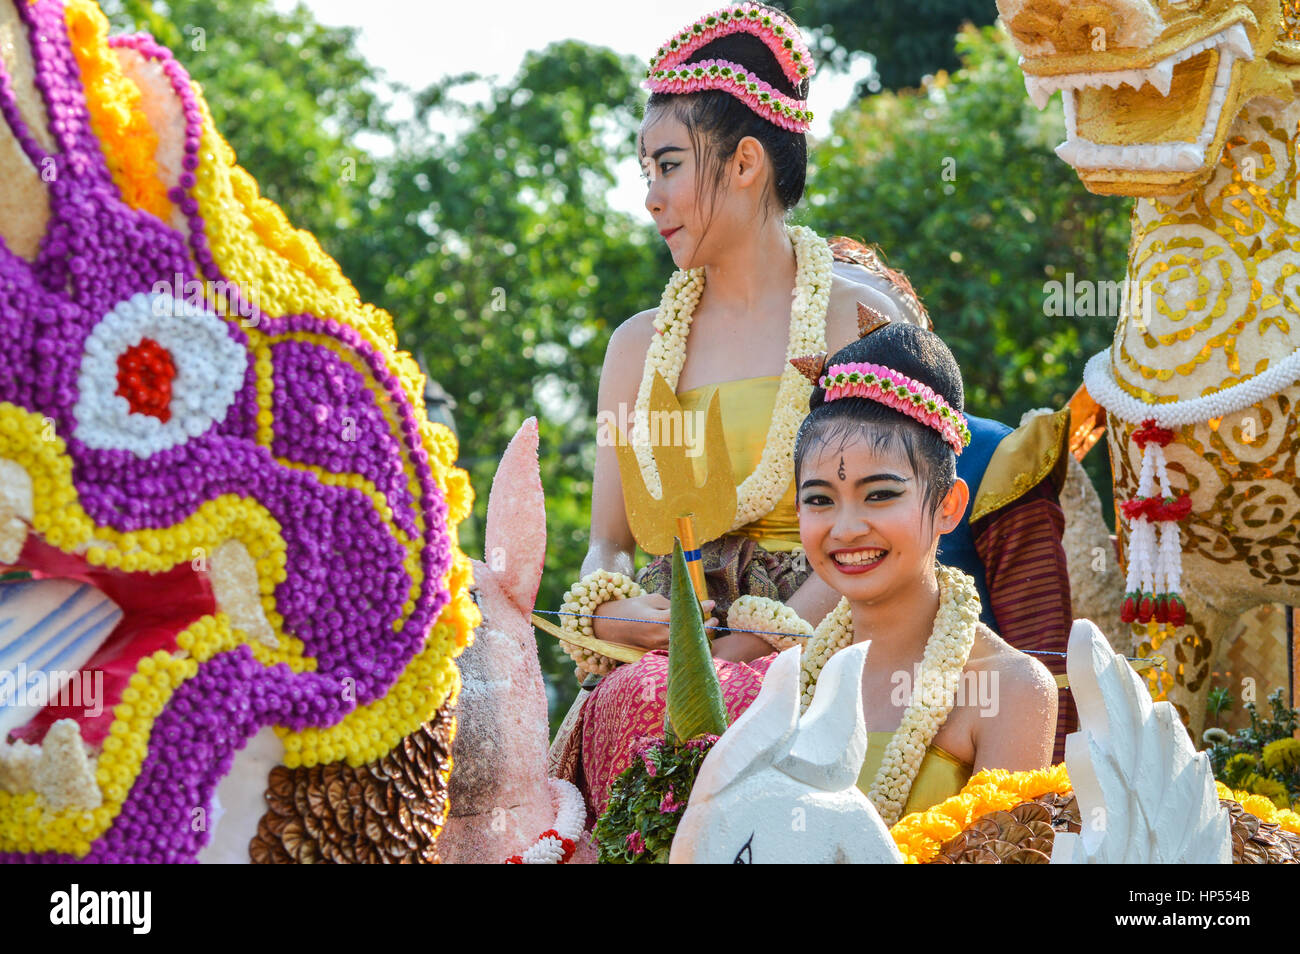 Chiang Rai, Thailand - April 12, 2015 : The Songkran festival parade. Songkran is the holiday known for its water festival. Stock Photo